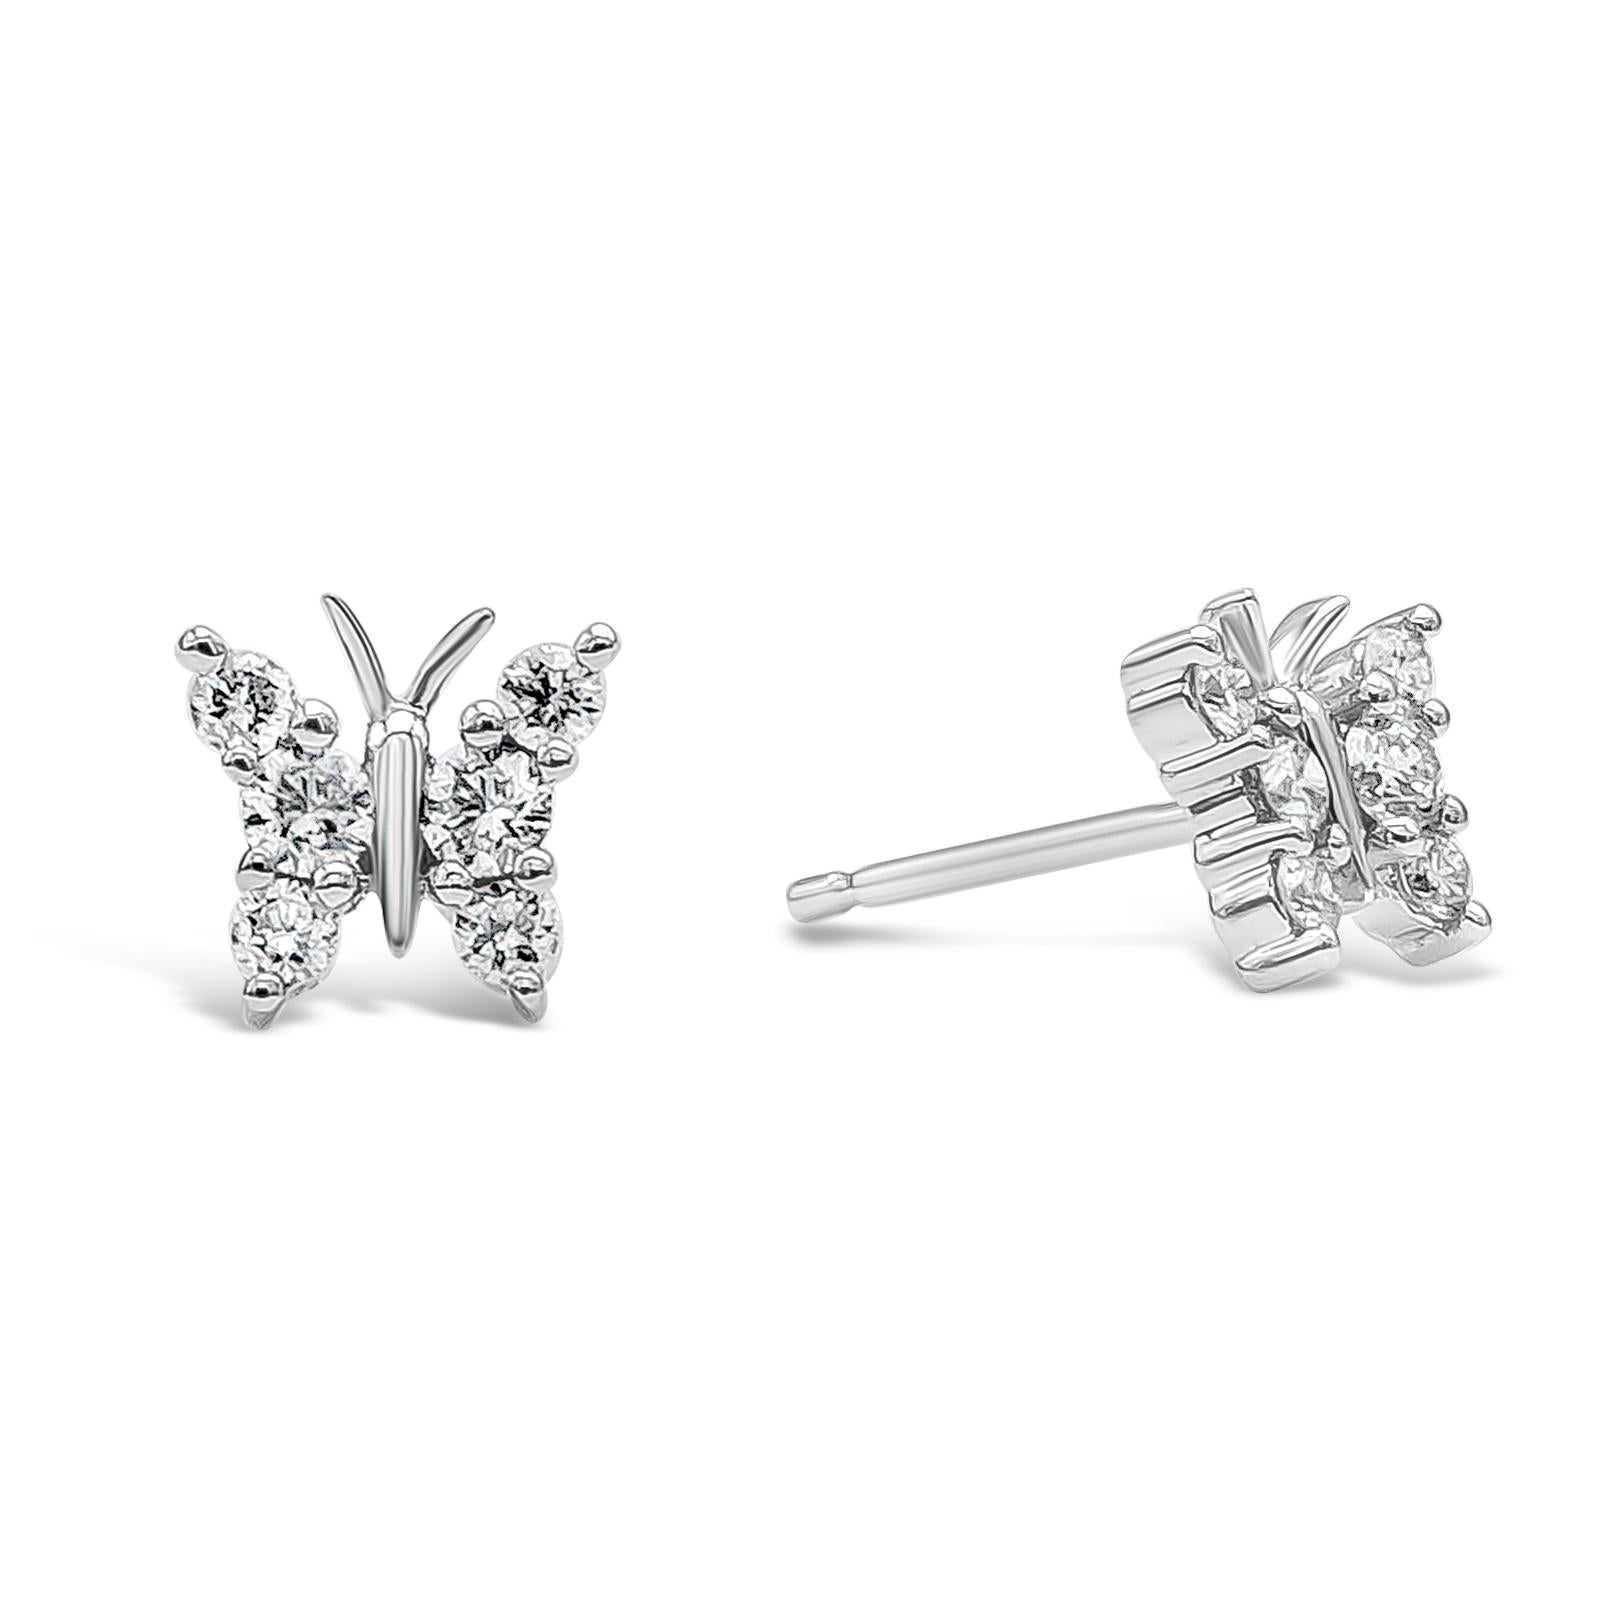 A simple and stylish pair of earrings featuring 12 pieces of brilliant round diamonds, weighing 0.30 carat total, F Color, VS-SI in Clarity. Beautifully set in a butterfly motif design and Made in 18K White Gold.

Style available in different price